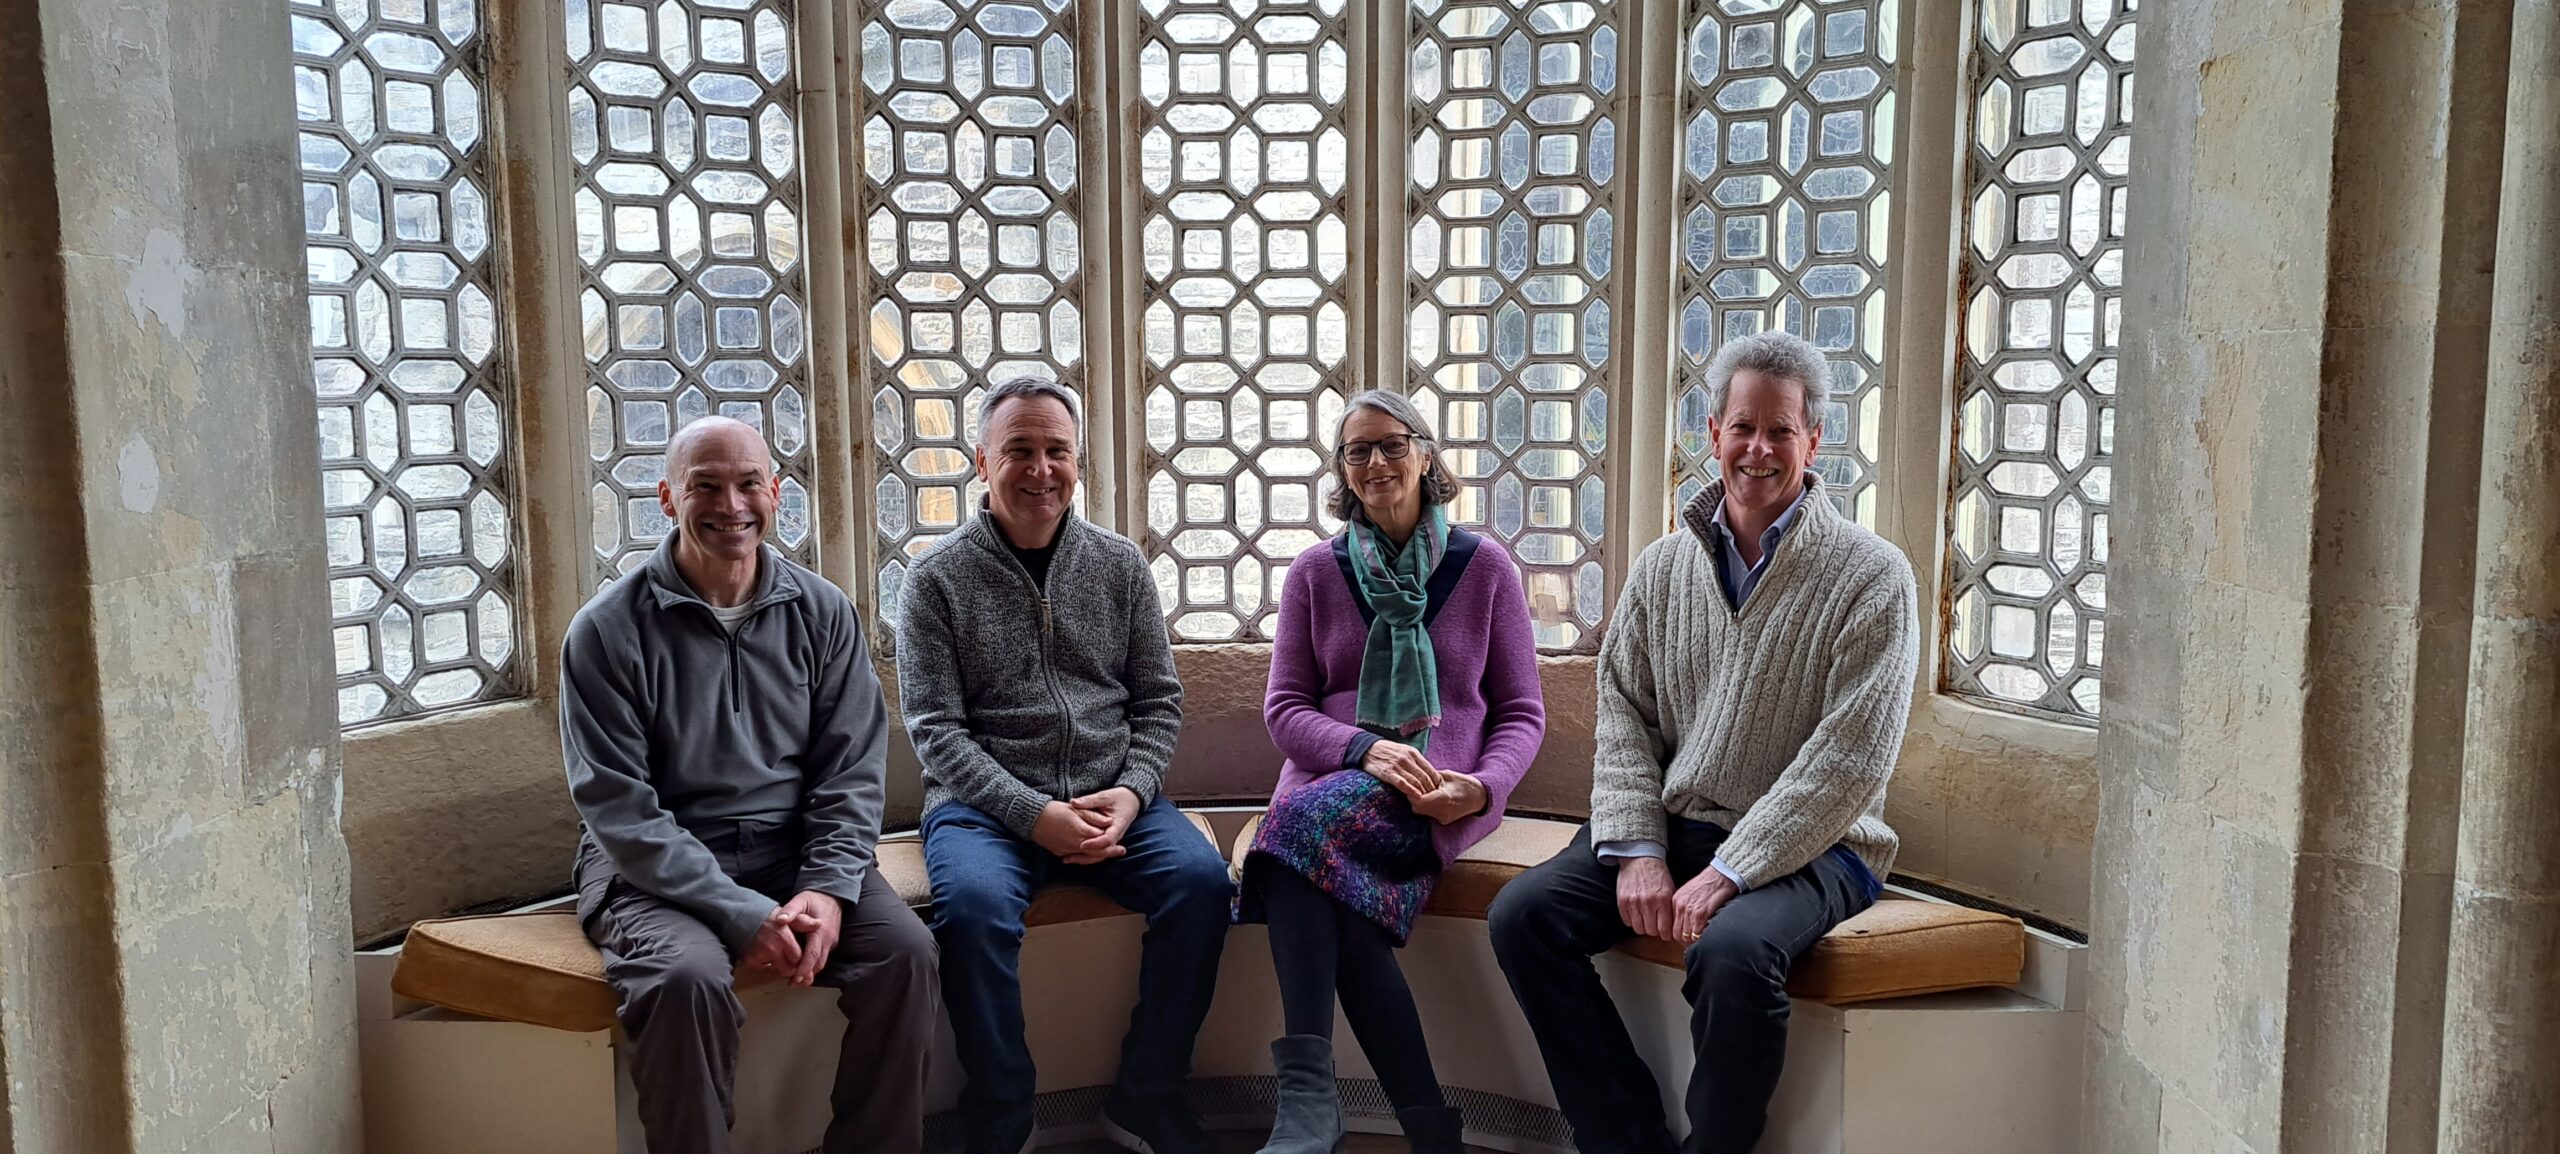 From left to right; Neil Smith, Mark Chivers, Jenny Morisetti and Giles Watts